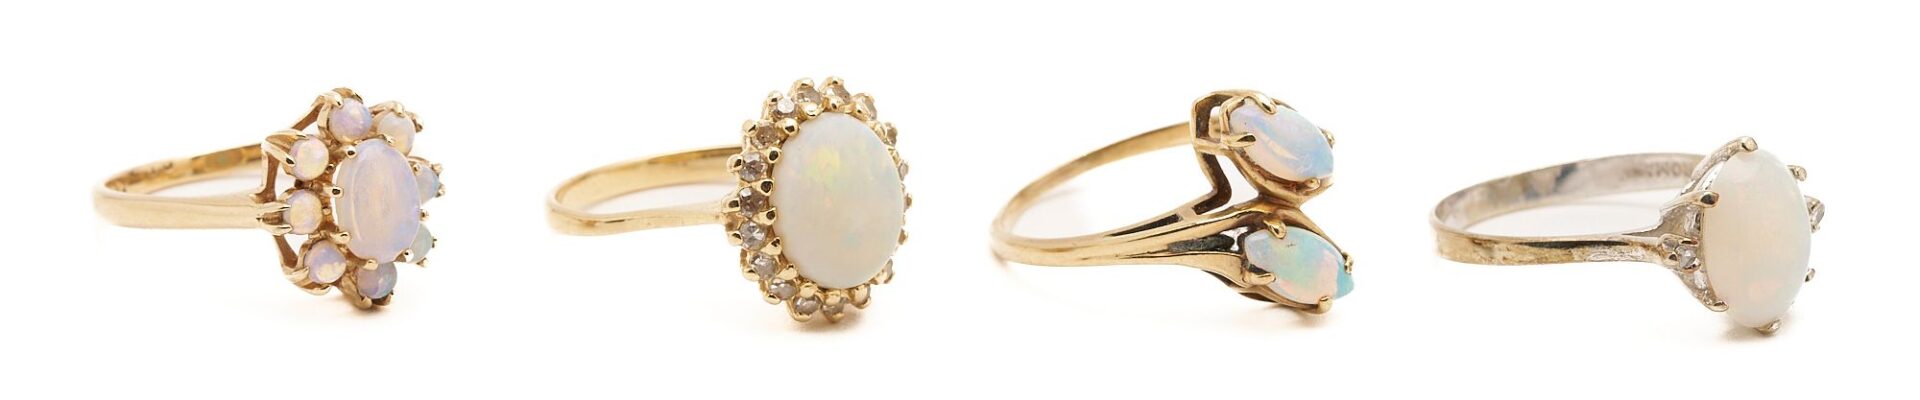 Lot 969: Four Gold & Opal Rings